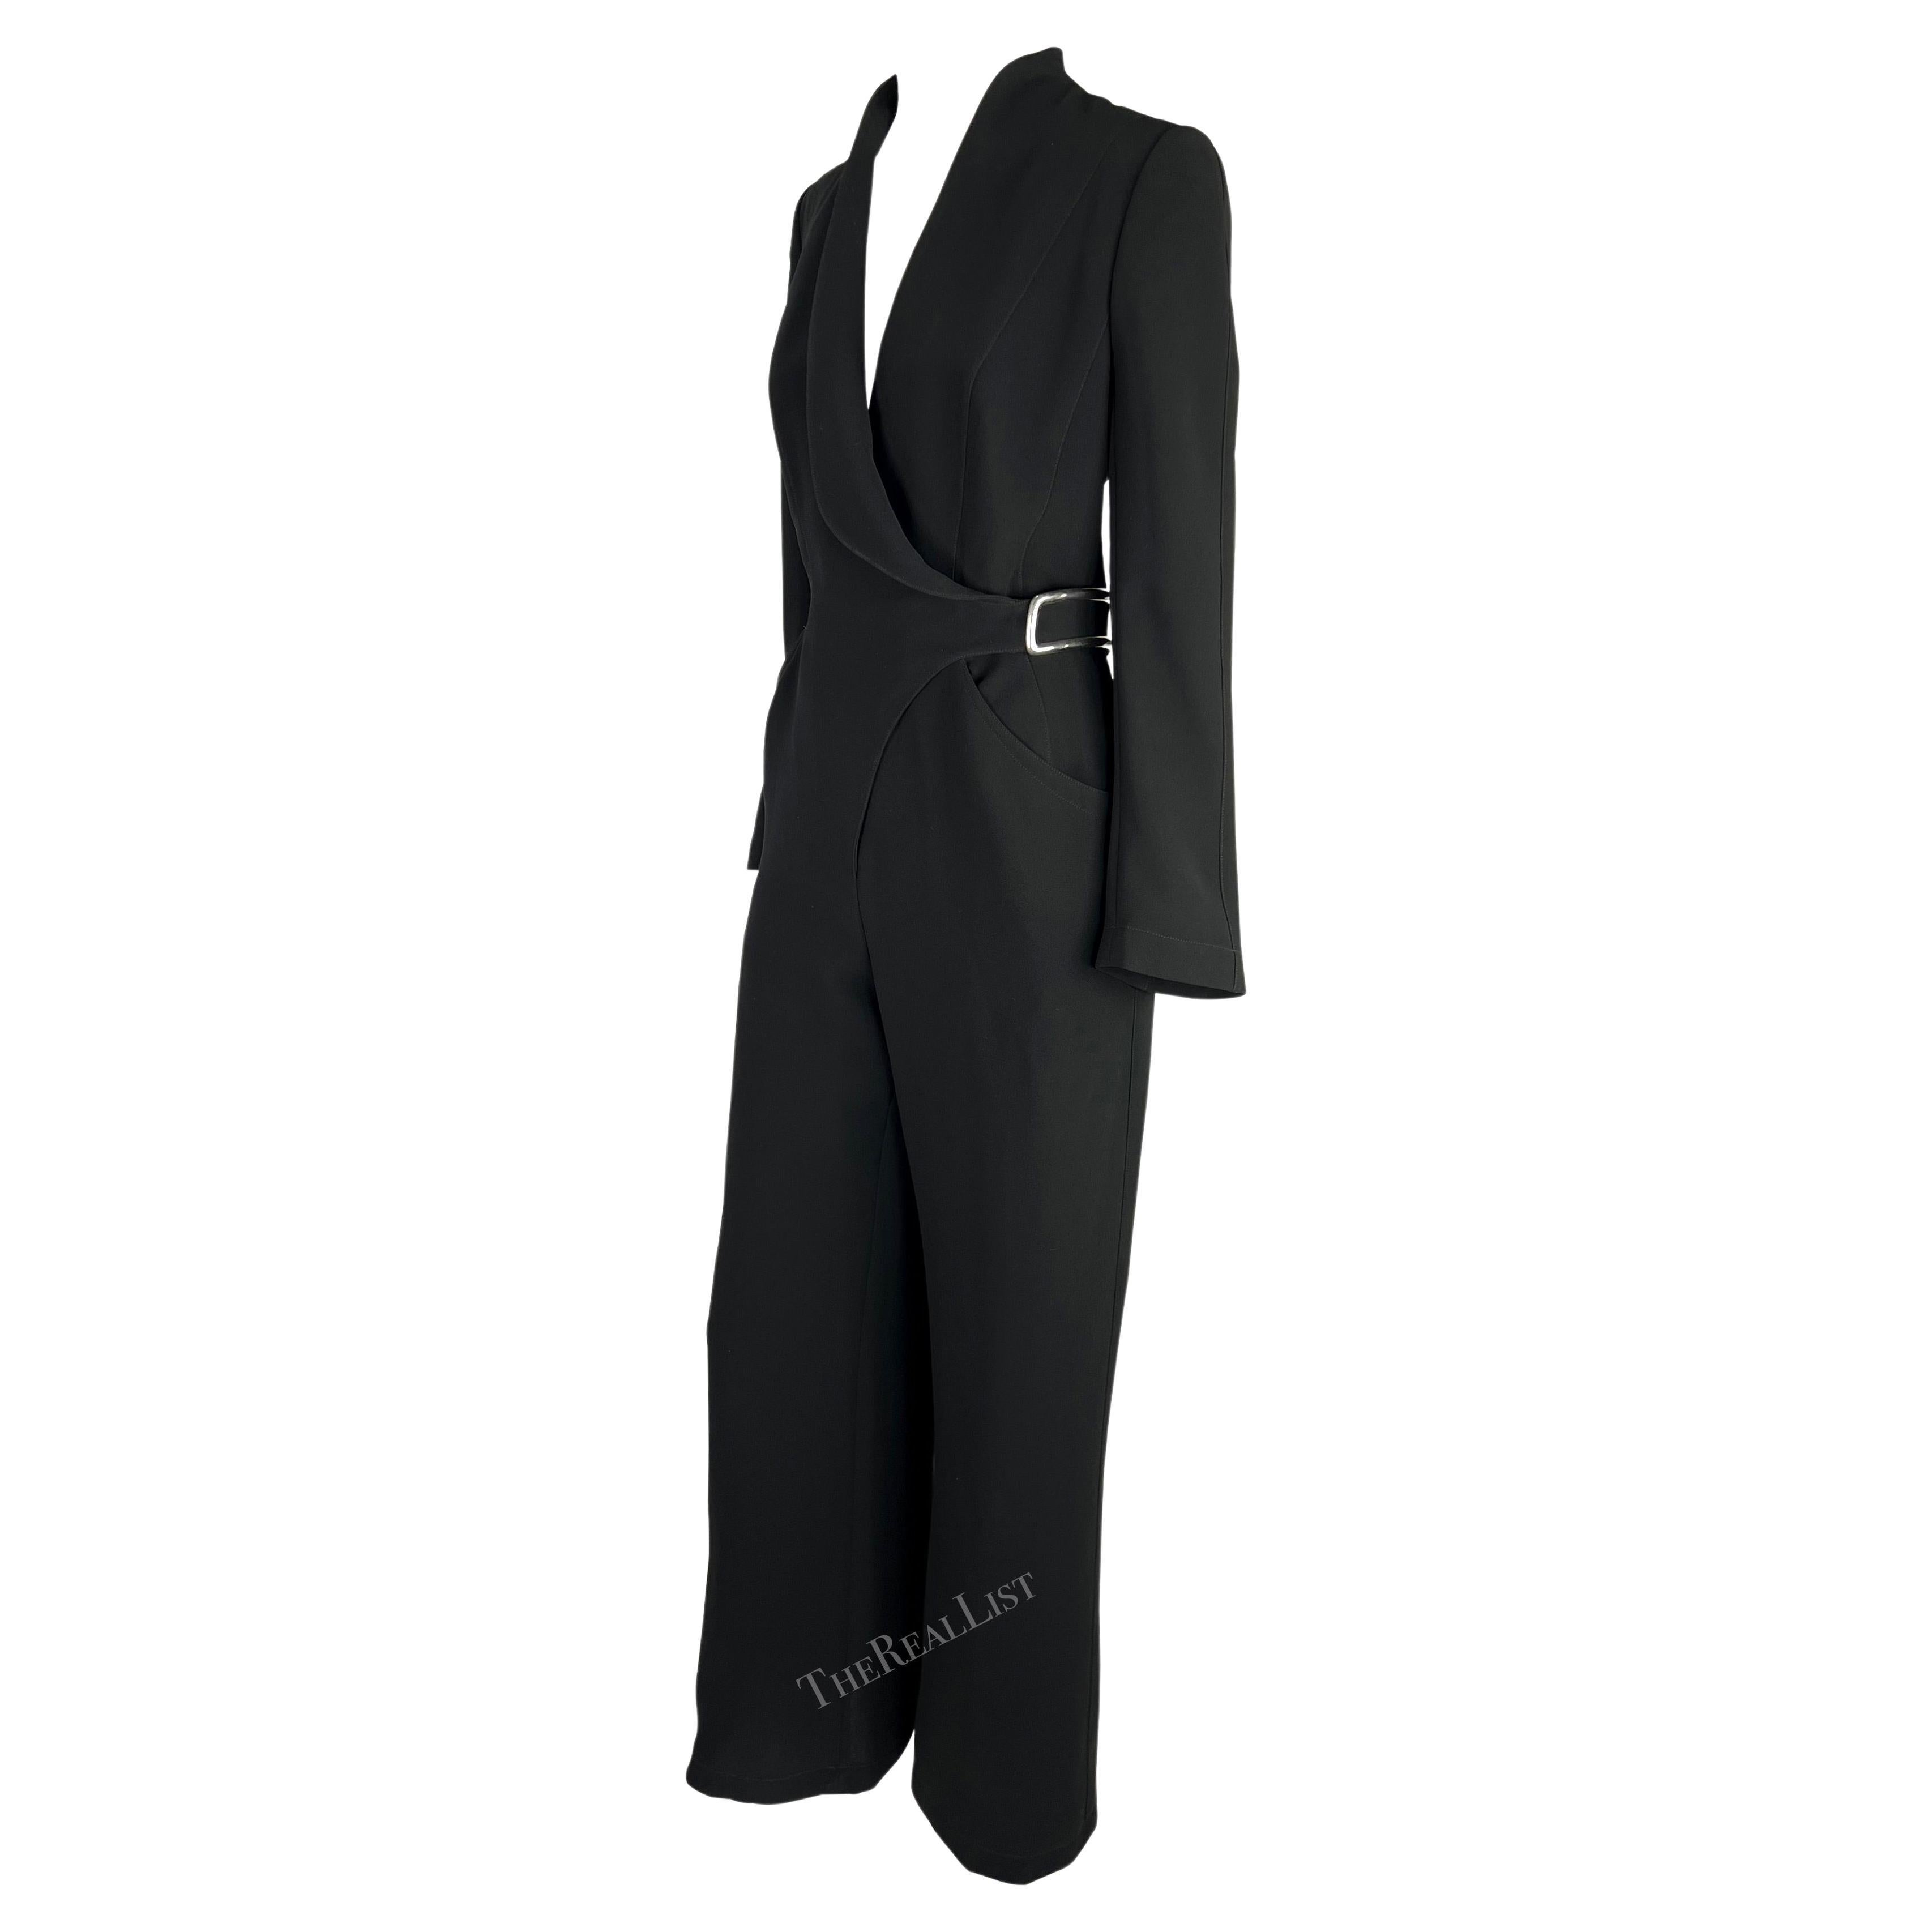 F/W 1999 Thierry Mugler Black Jumpsuit Oversized Metal Buckle Plunge Suit For Sale